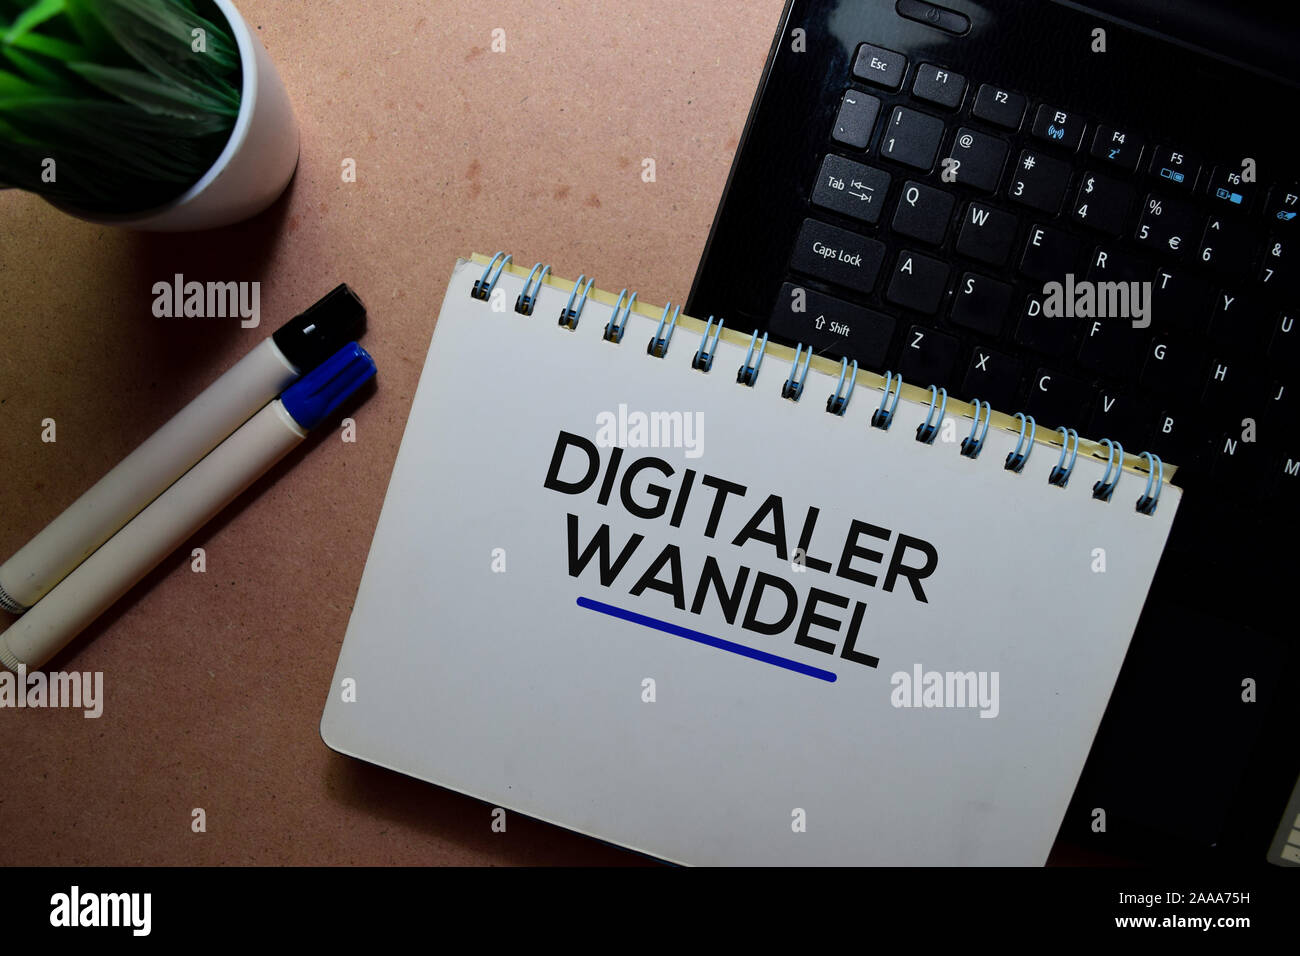 Digitaler Wandel write on a book and laptop. Isolated on wooden table Stock Photo